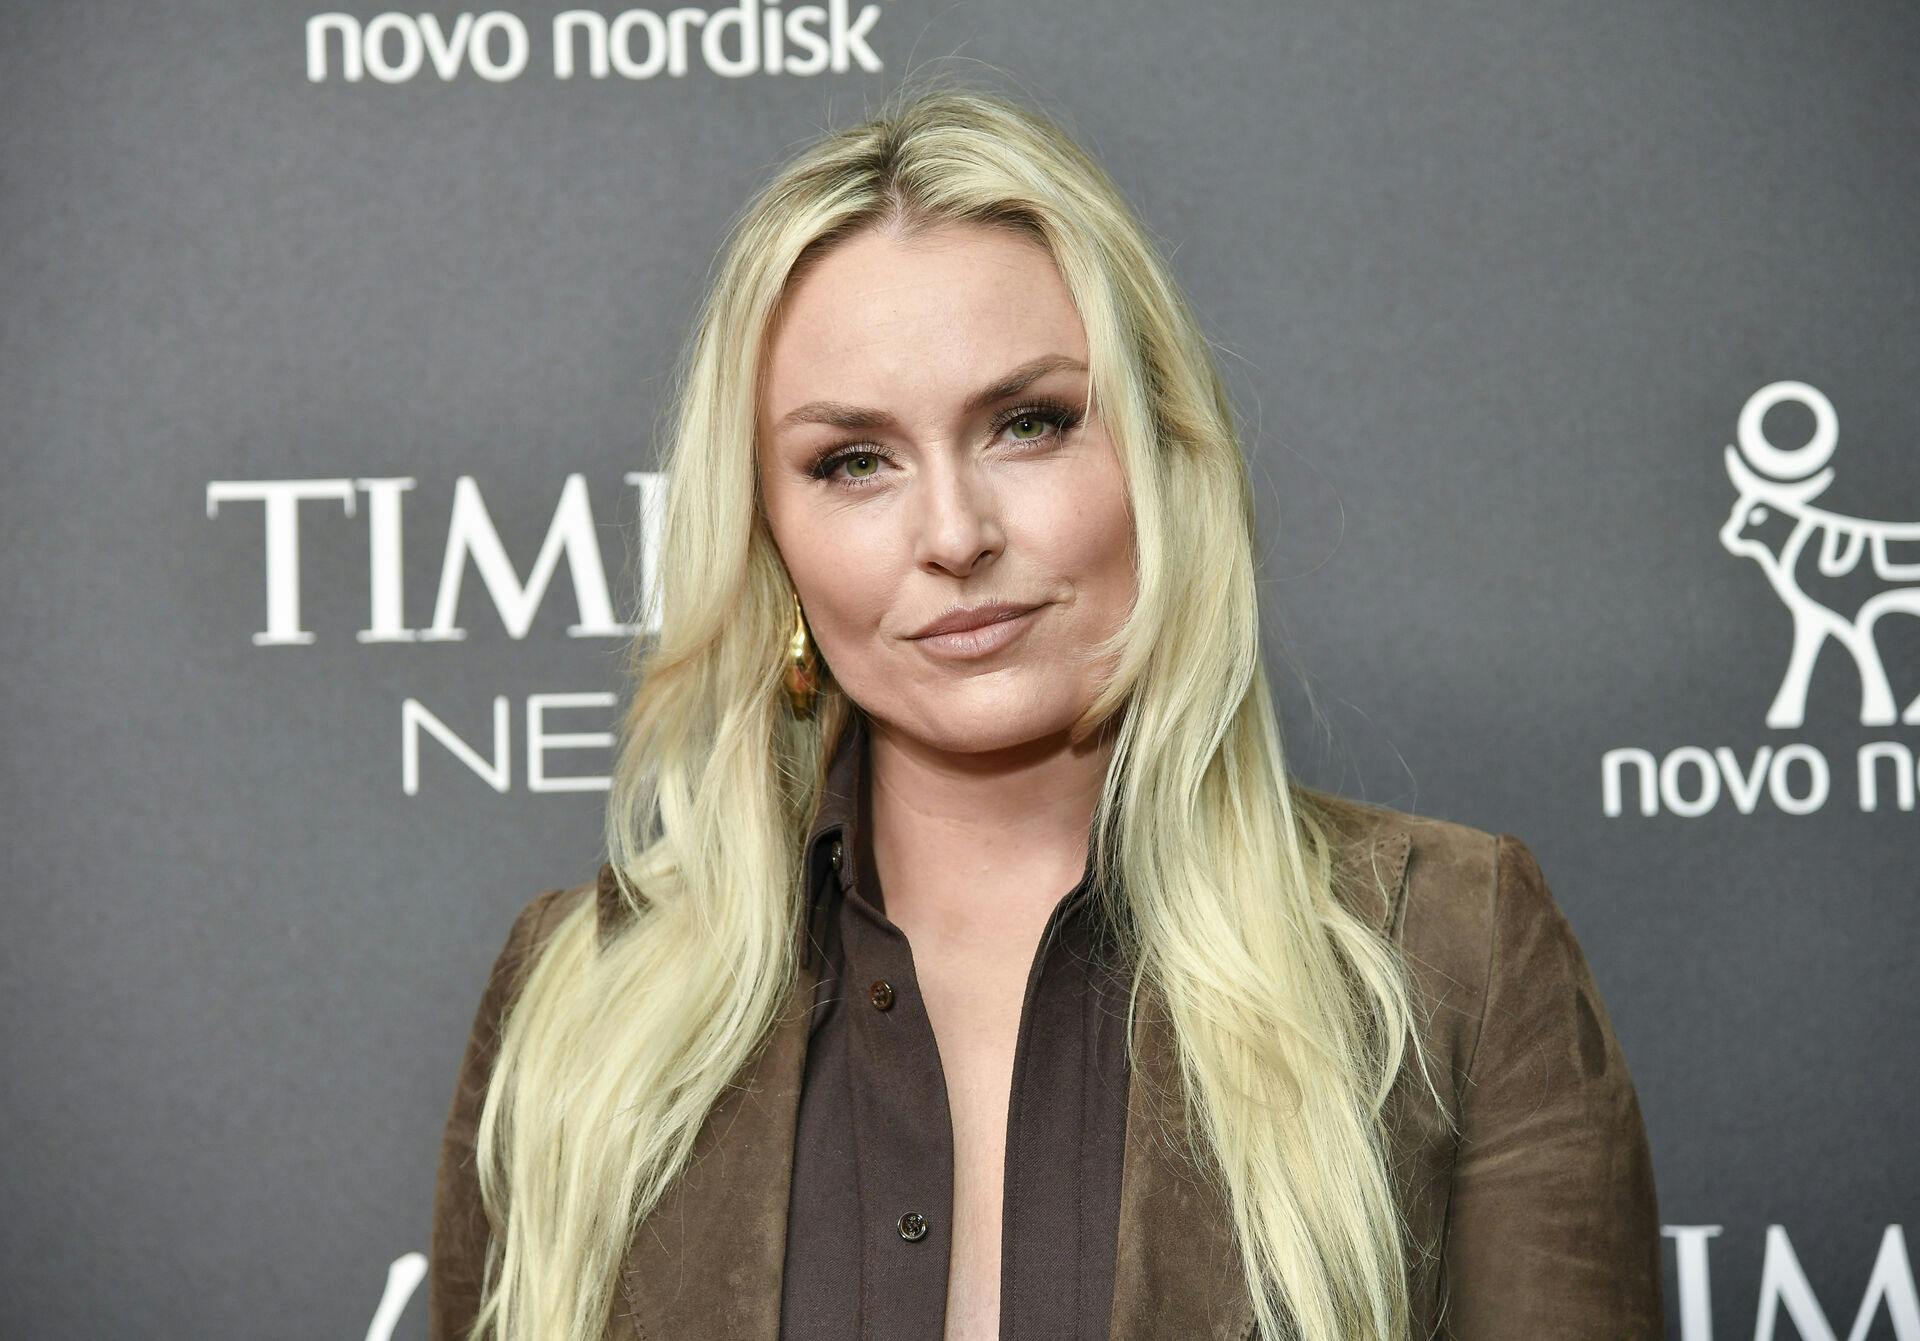 Lindsey Vonn attends the Time100 Next event at Second on Tuesday, Oct. 24, 2023, in New York. (Photo by Evan Agostini/Invision/AP)